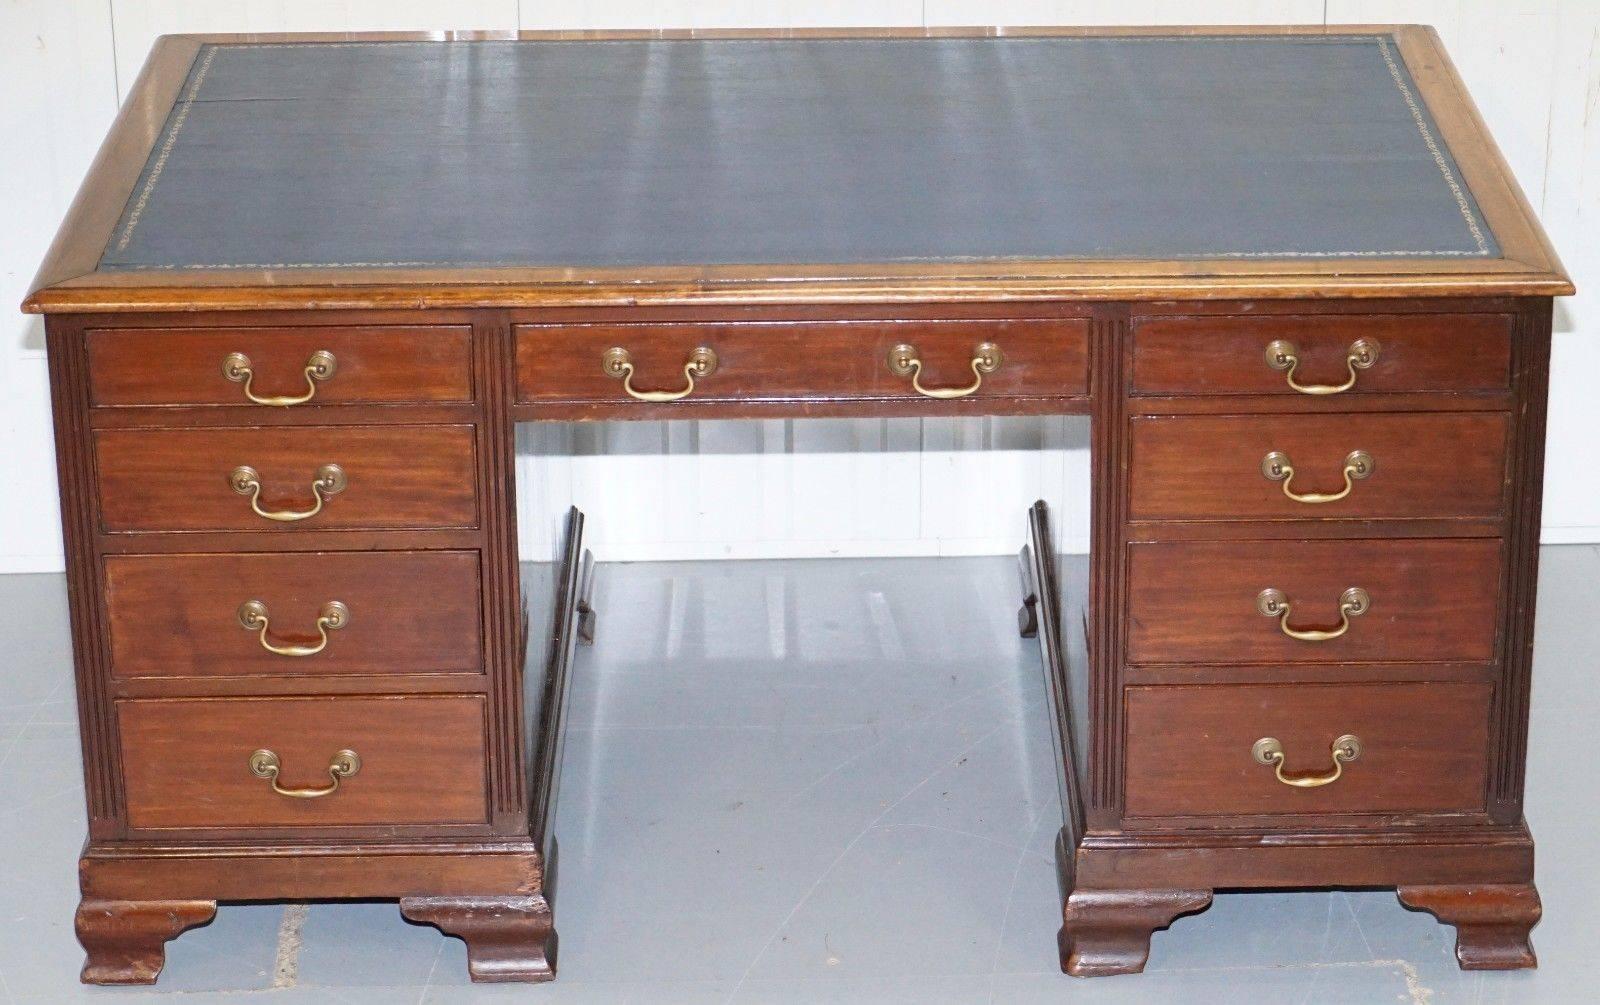 Lovely original Victorian solid mahogany twin pedestal double sided partner desk

Please note the delivery fee listed is just a guide, for an accurate quote please send me your postcode and I’ll price it up for you

This desk is one of the original